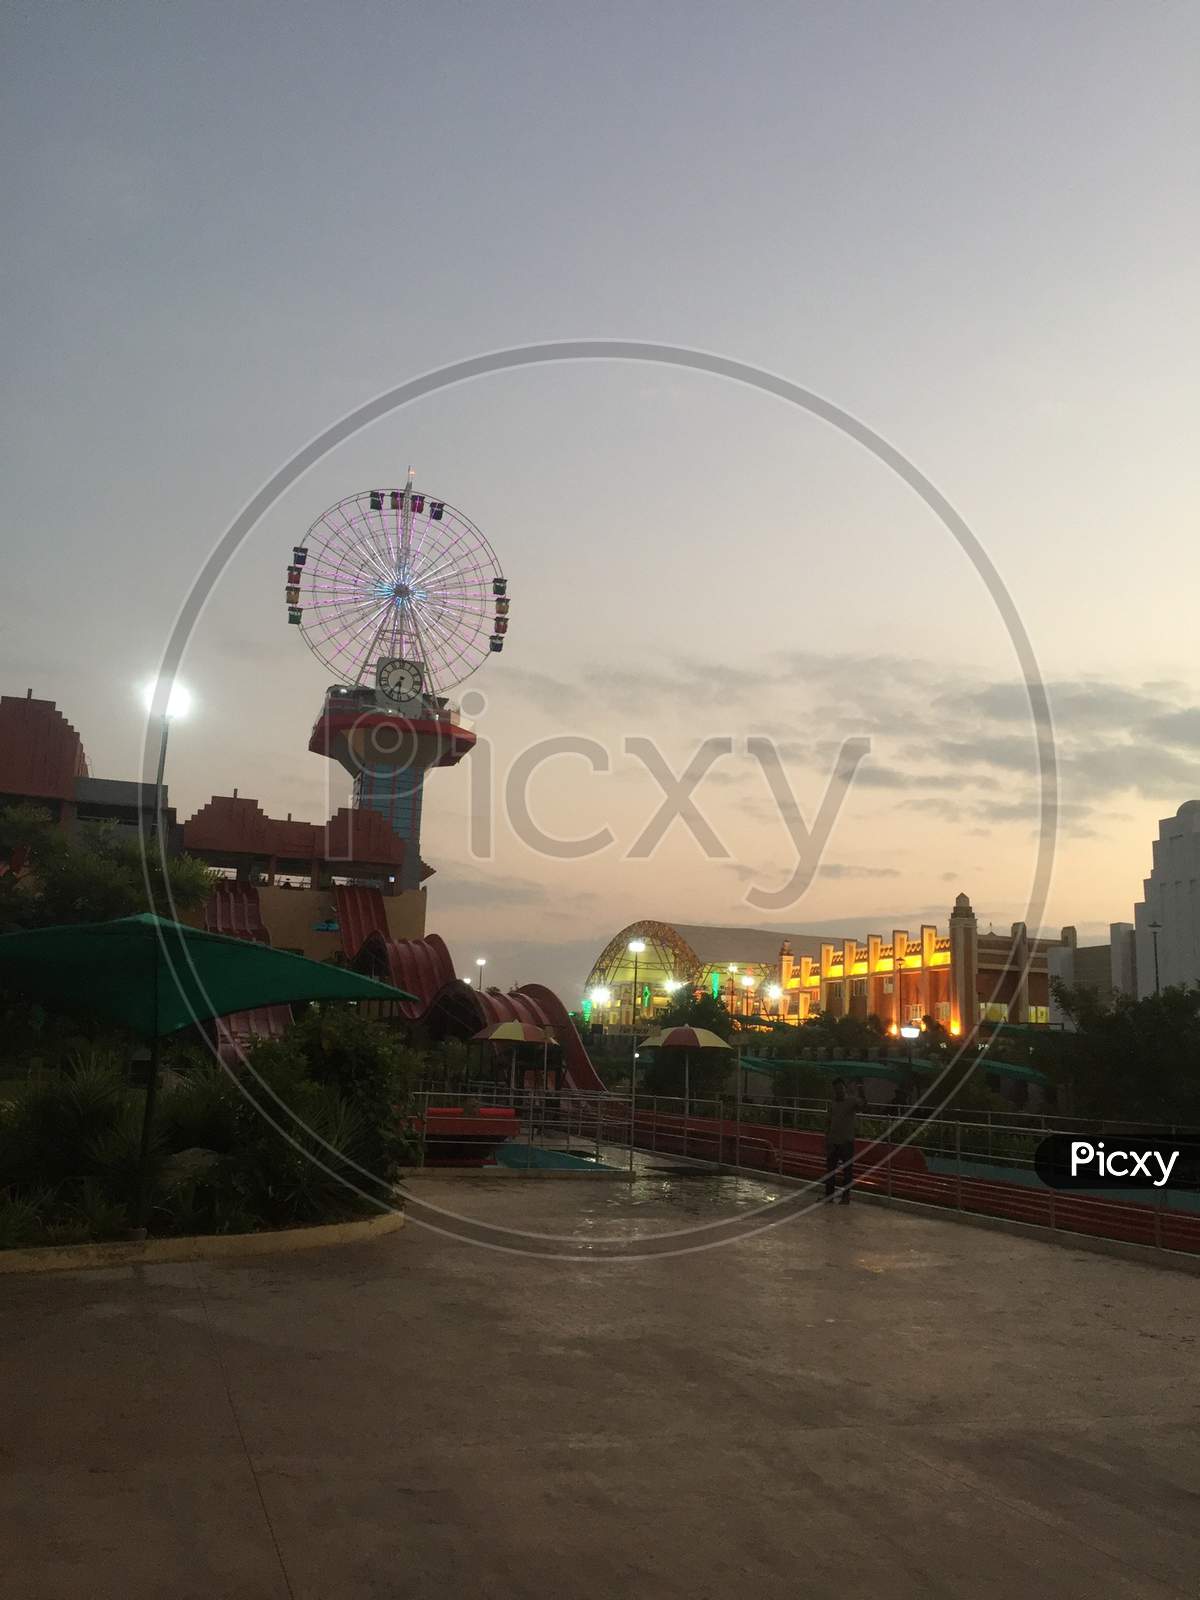 I am evening view of an amusement park With the lights on